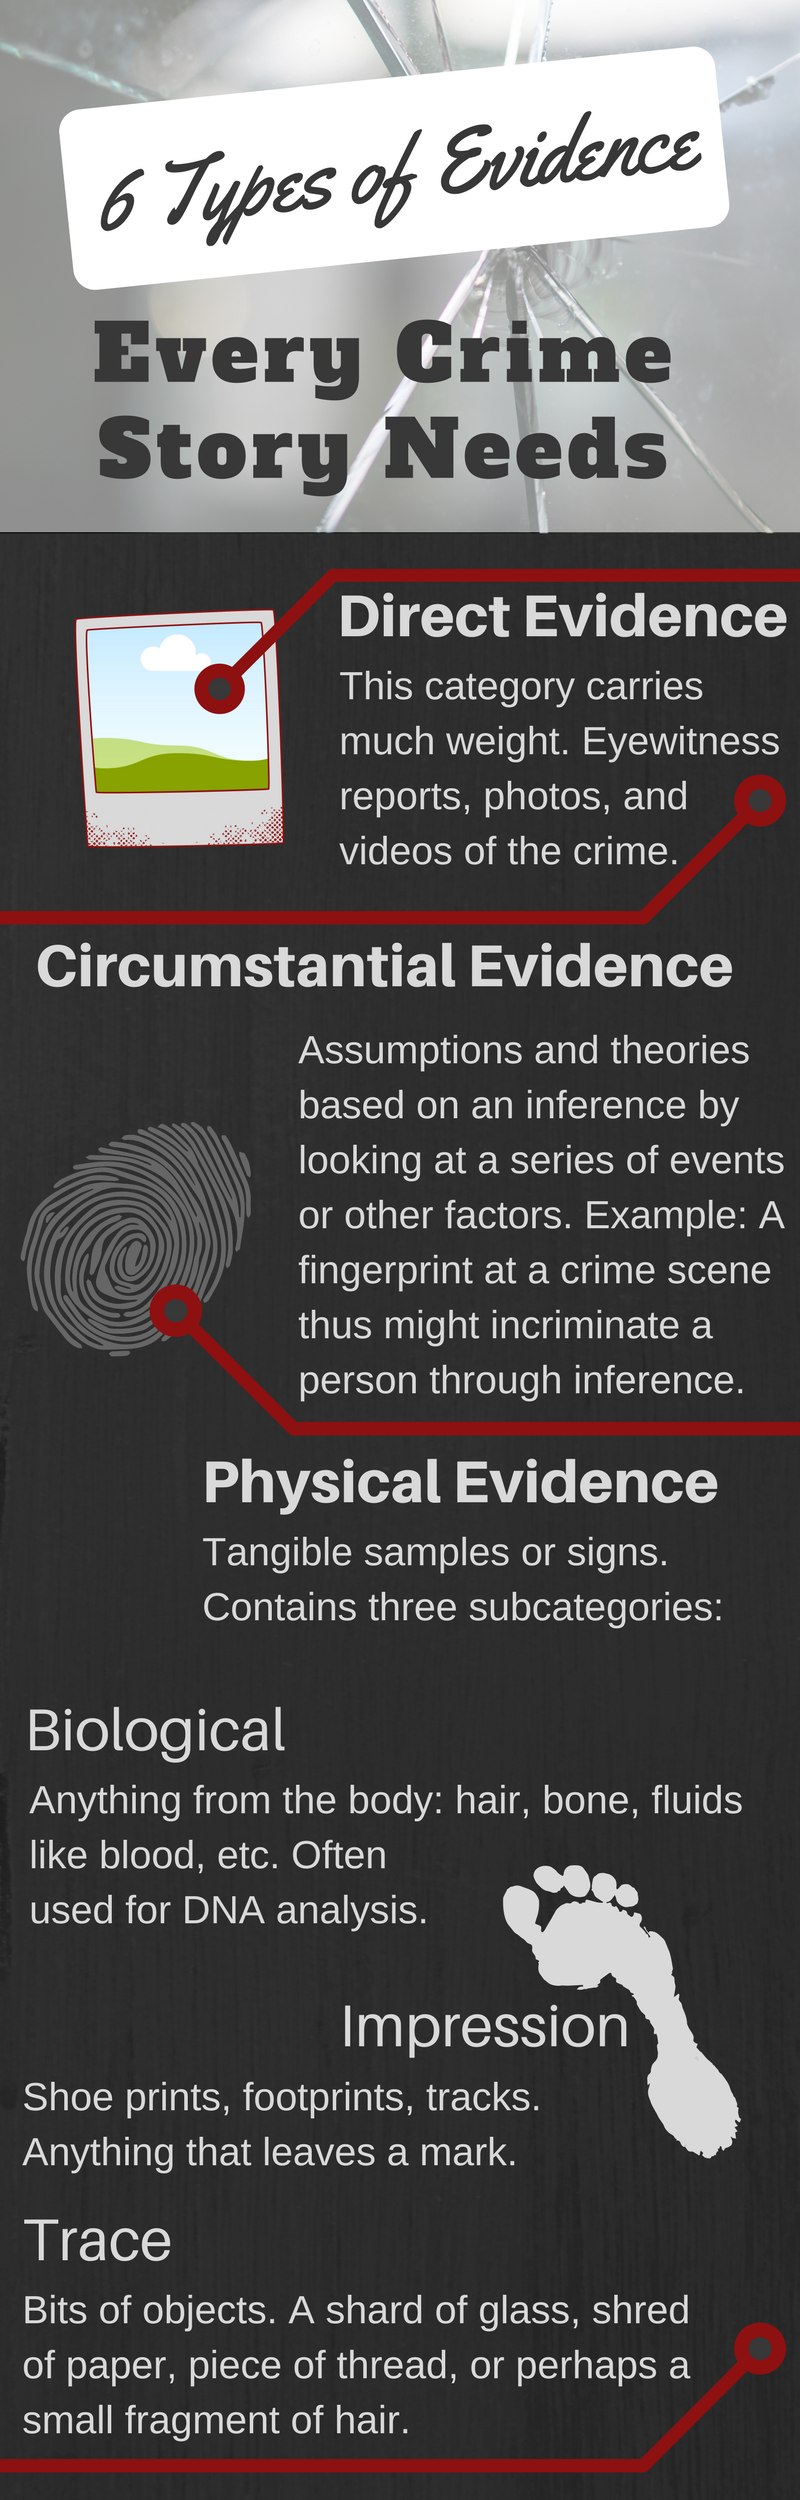 6 Types of Evidence.png